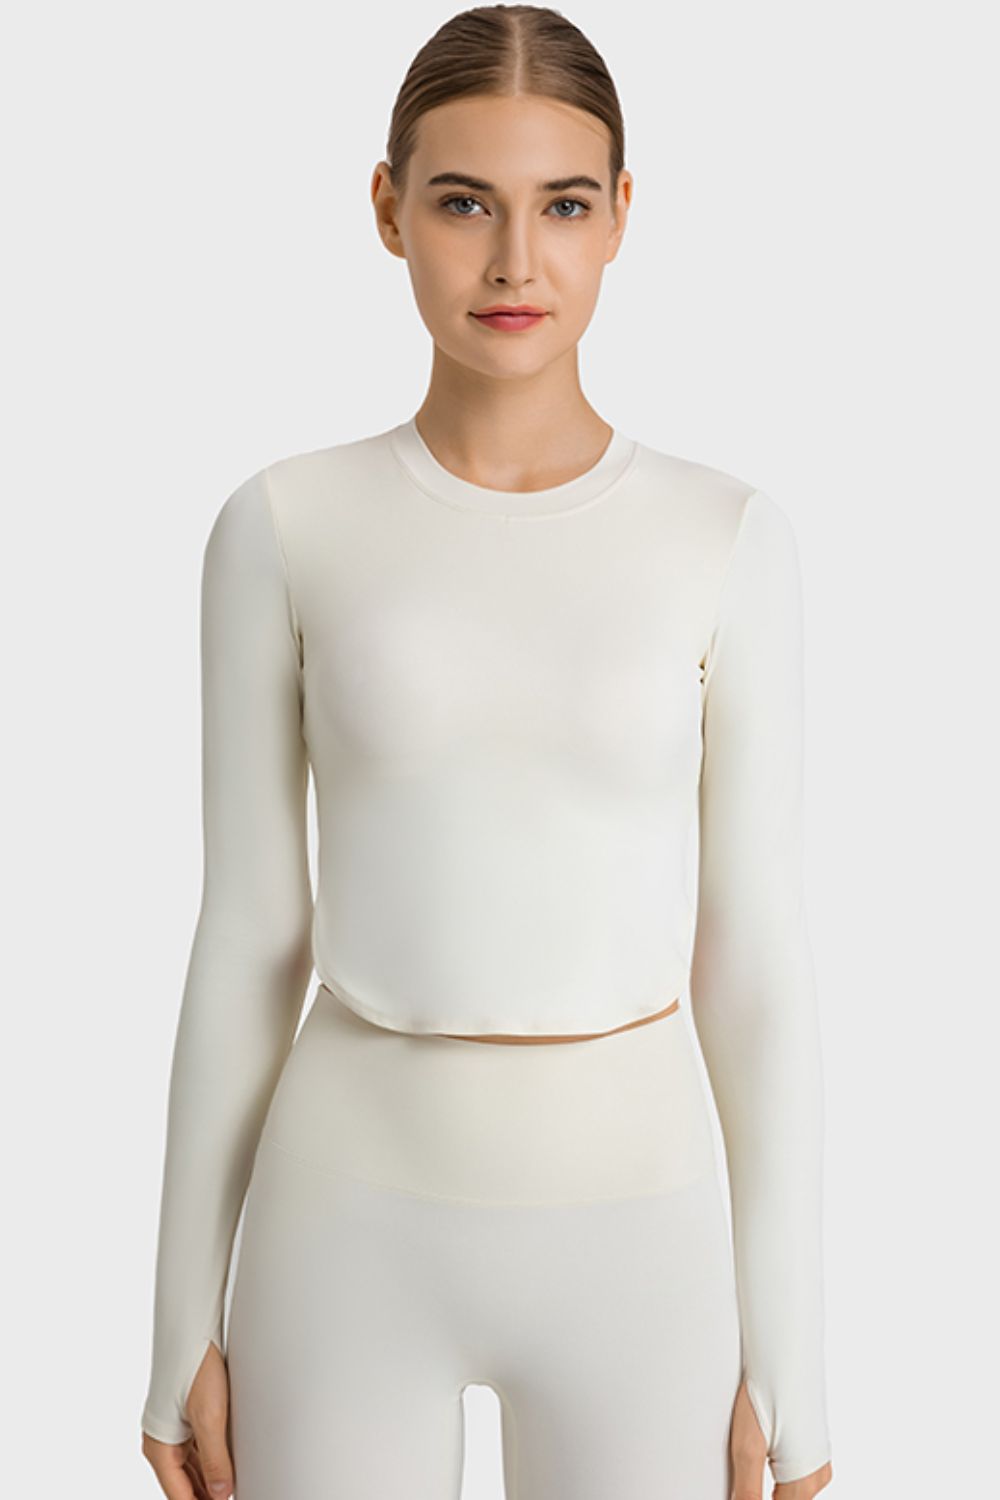 Side Slit Long Sleeve Round Neck Crop Top - White / 4 Apparel & Accessories Wynter 4 All Seasons